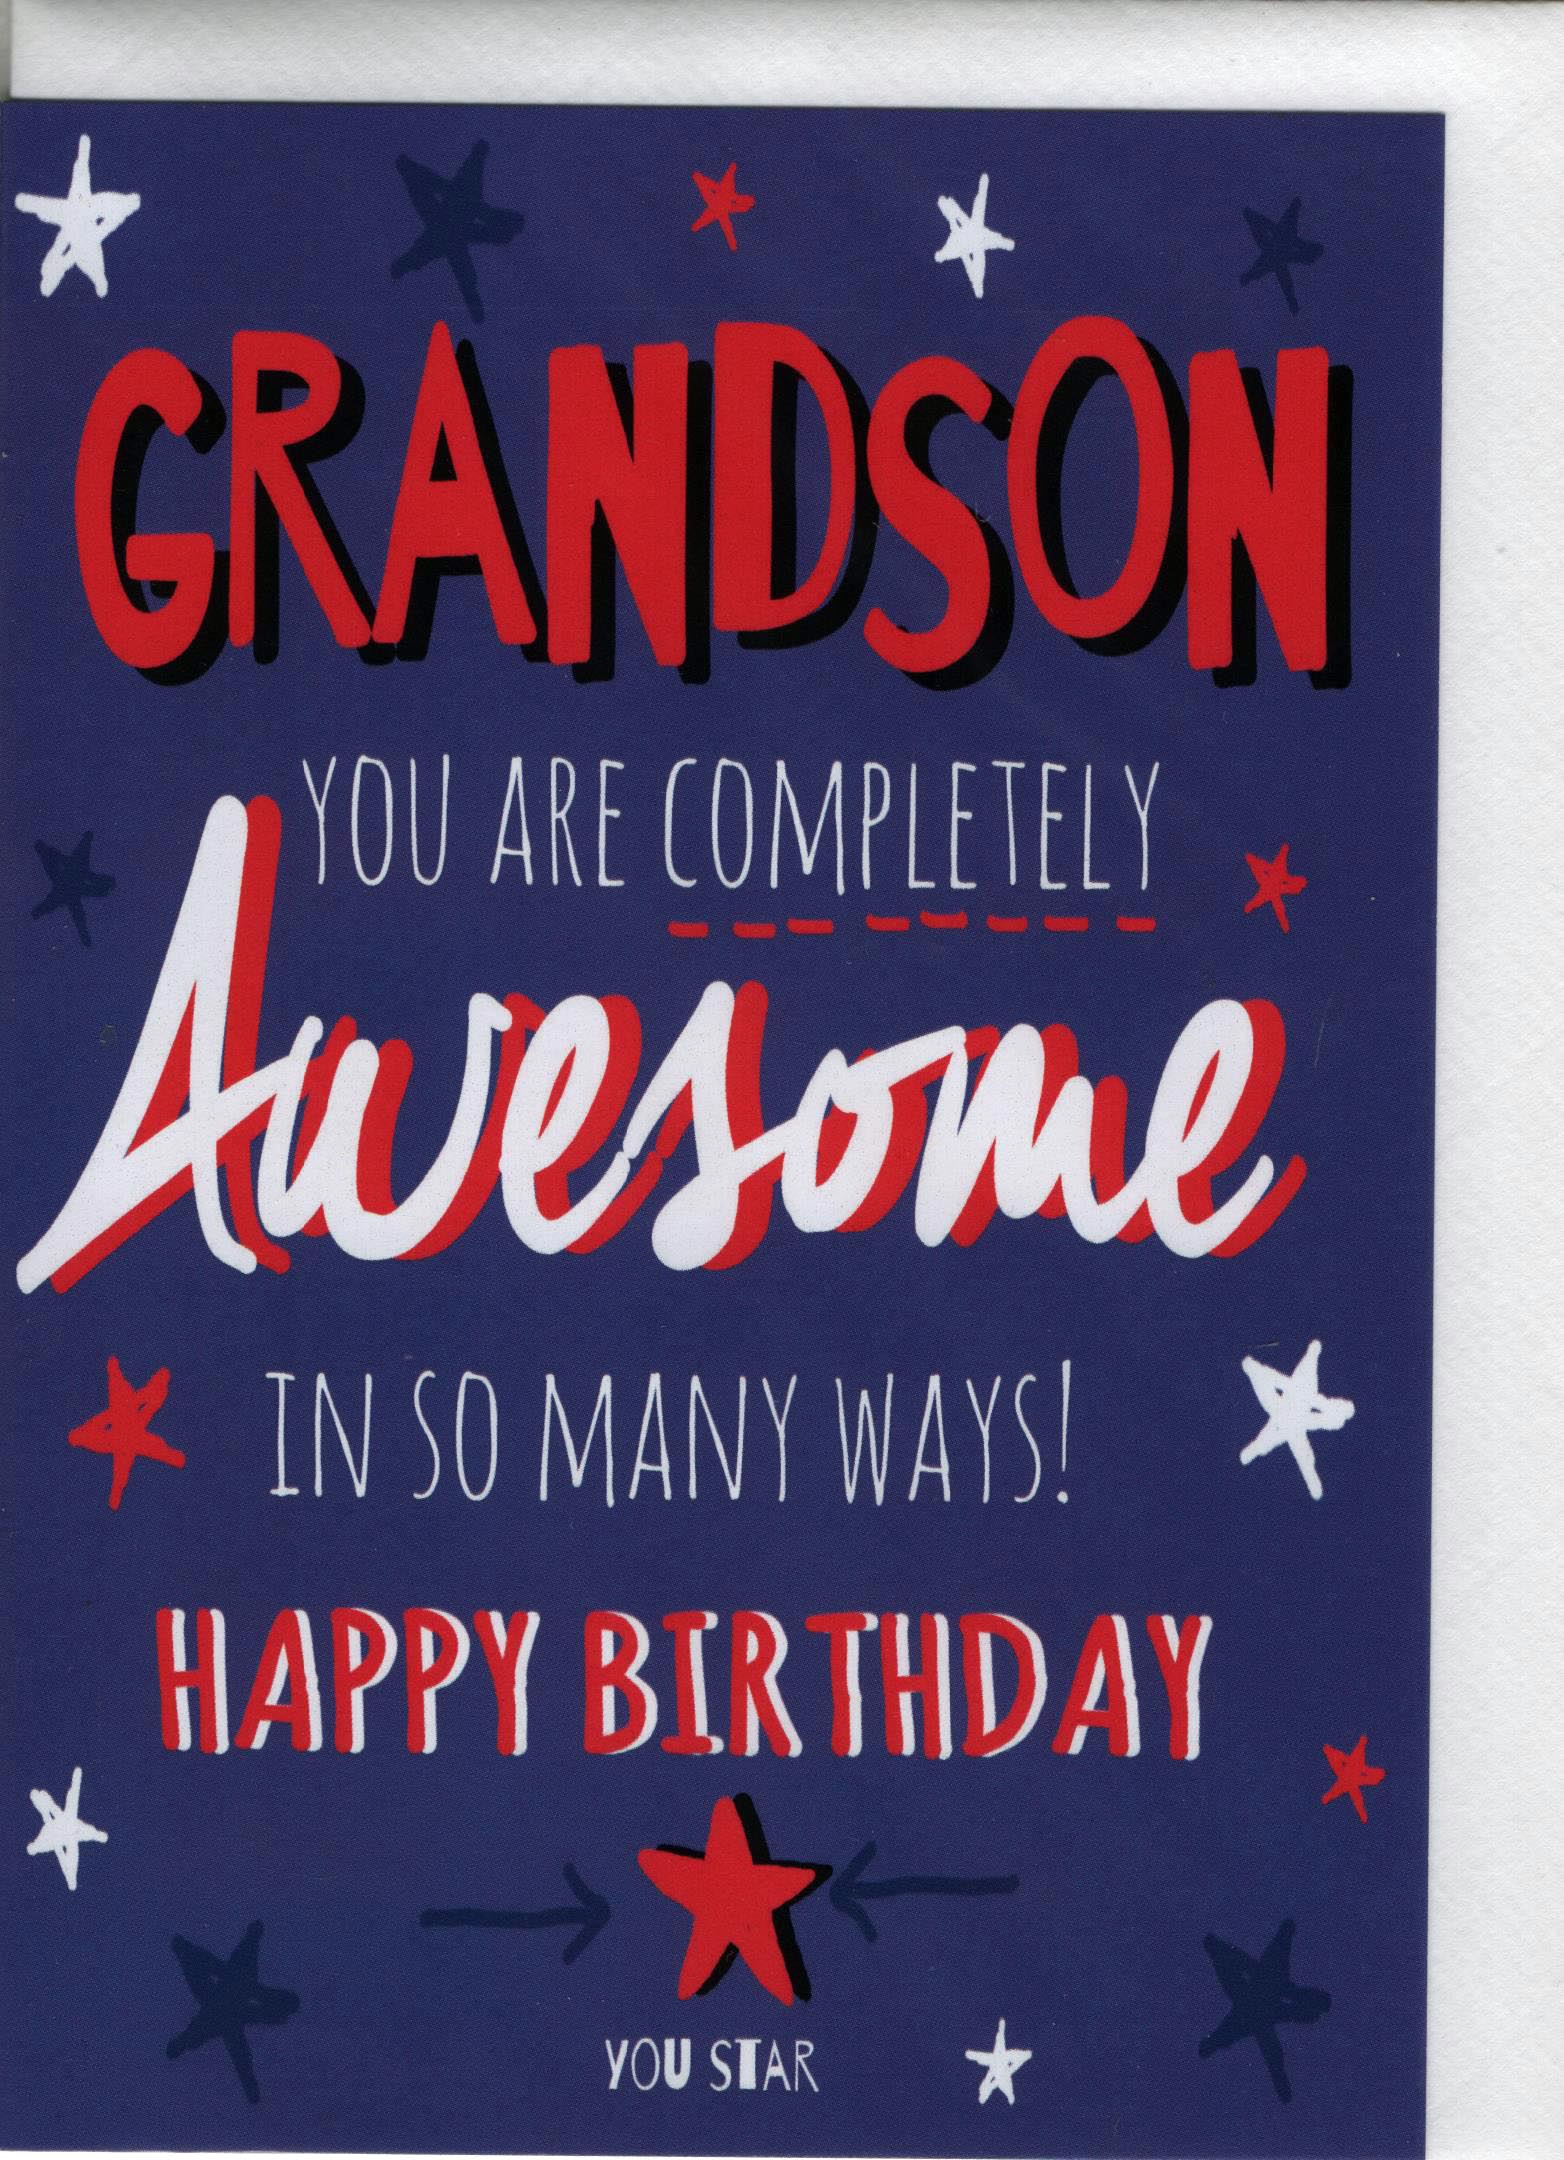 Grandson You are Completely Awesome in Many ways! Happy Birthday